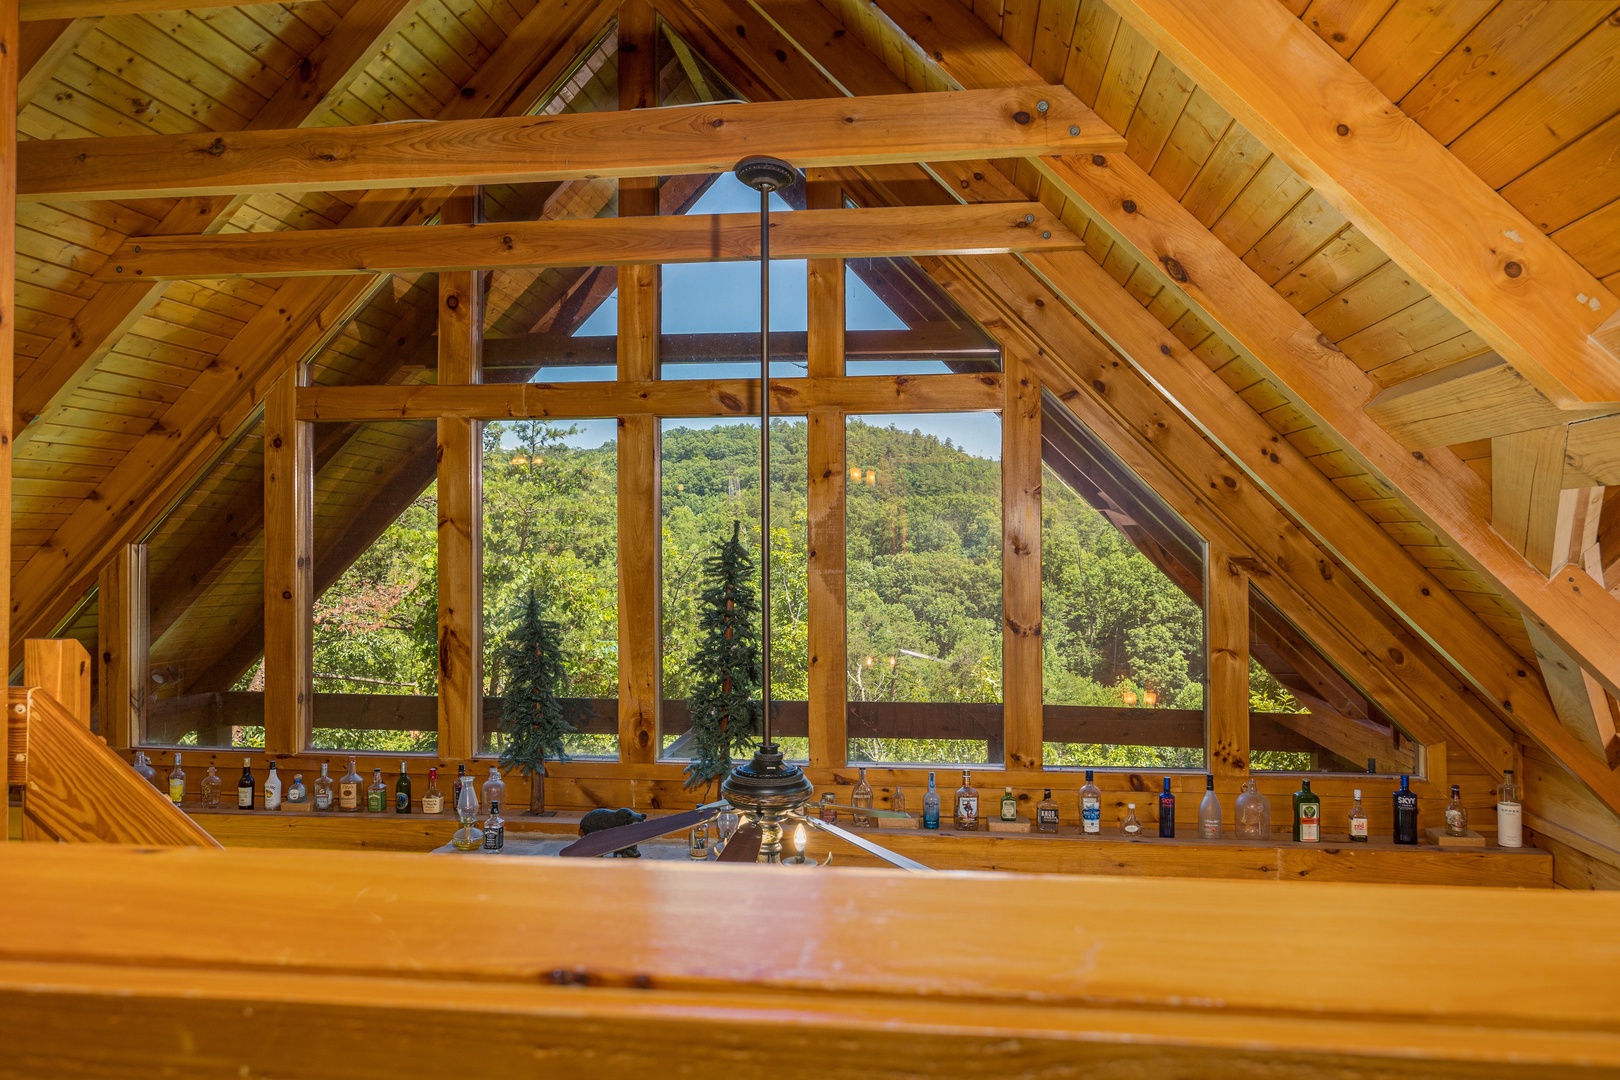 View from the loft at Moonbeams & Cabin Dreams, a 3 bedroom cabin rental located in Pigeon Forge